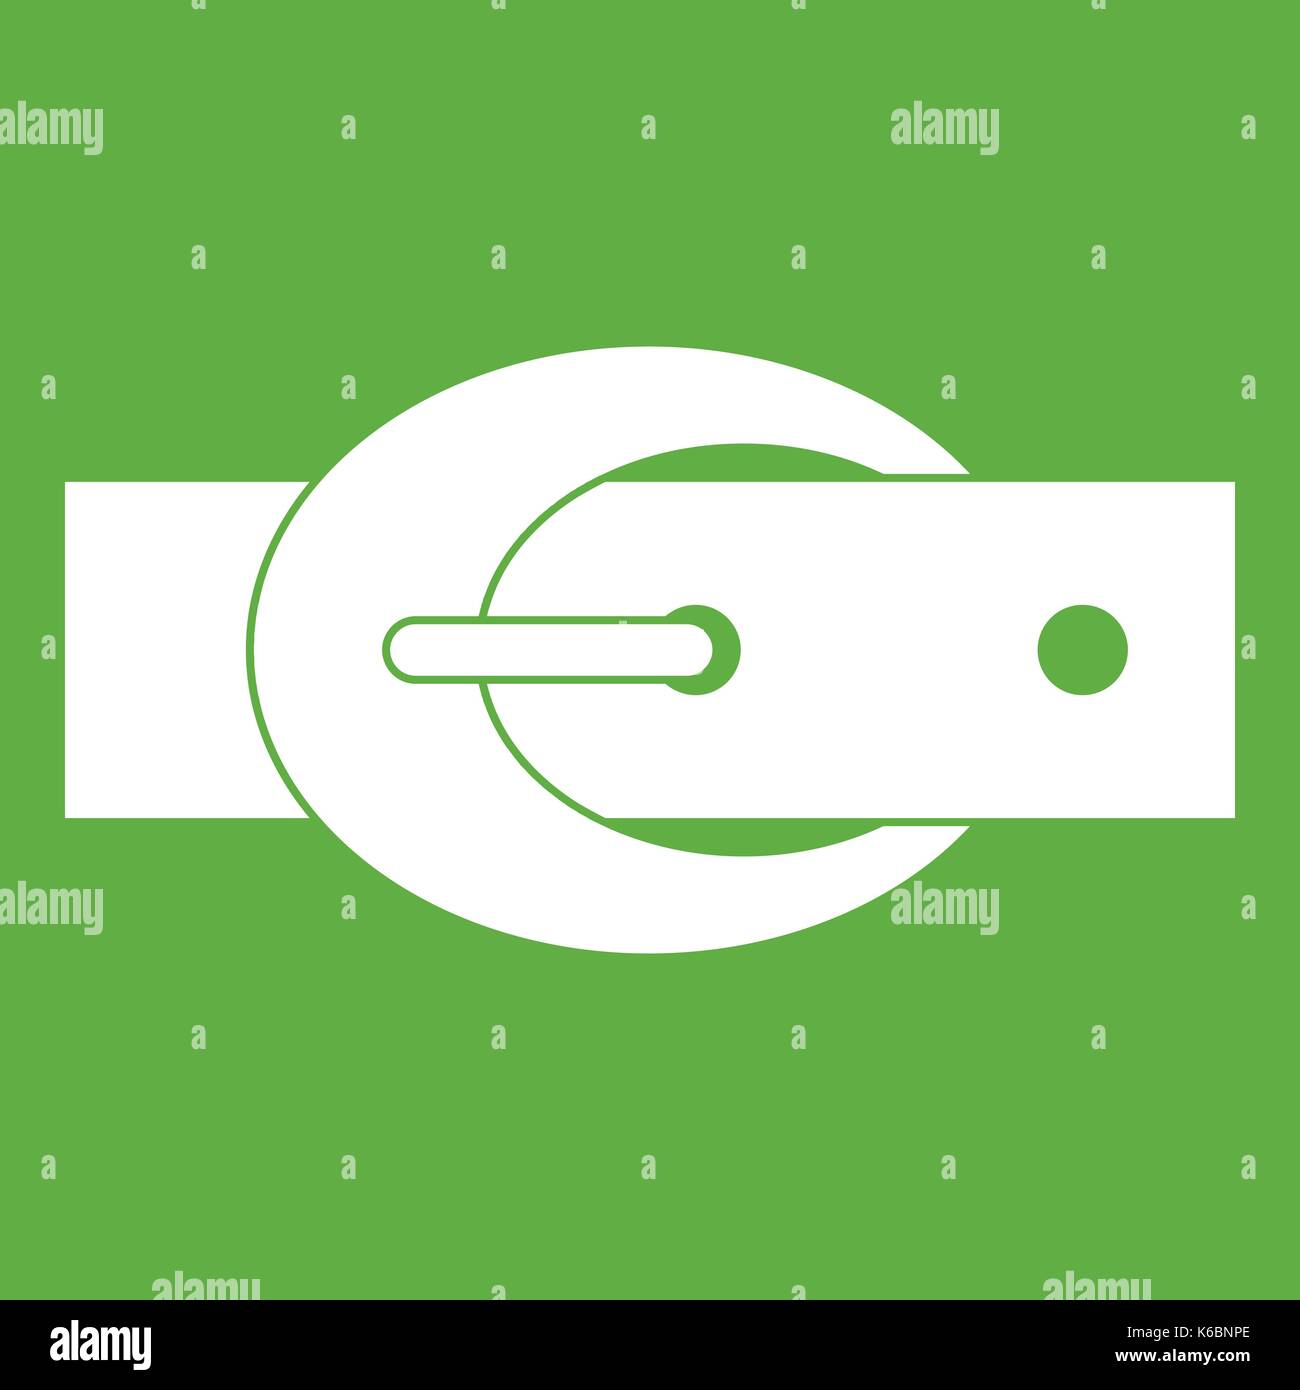 Oval belt buckle icon green Stock Vector